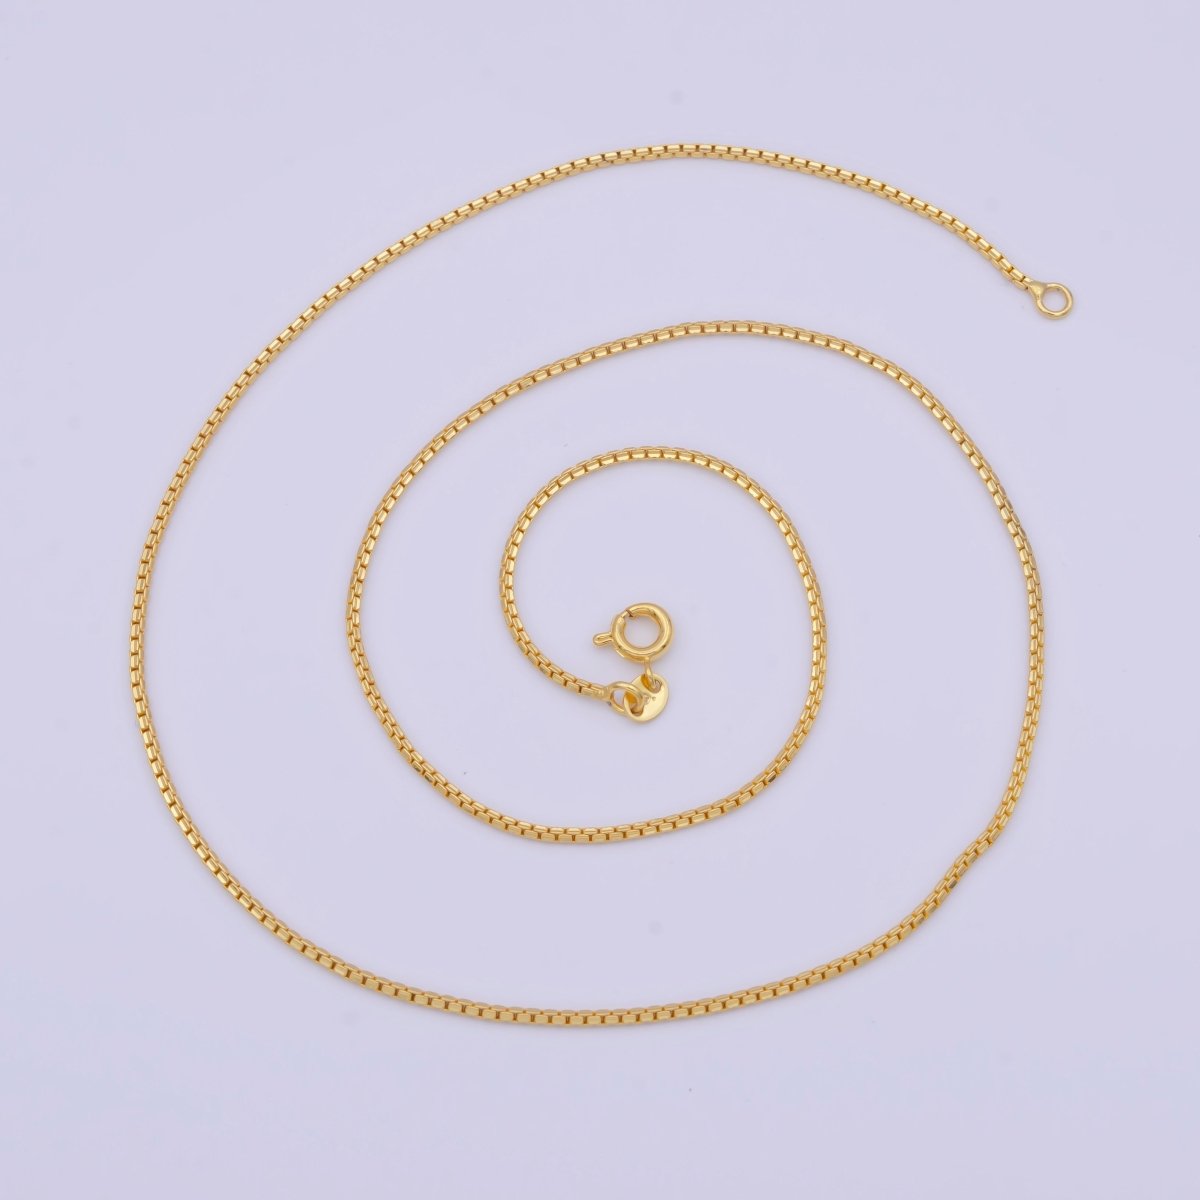 24k Gold Filled Box Chain Necklace Dainty Box Chain Necklace, 1mm Link Chain Necklace, Box Chain Ready to Wear Necklace | WA-1132 Clearance Pricing - DLUXCA